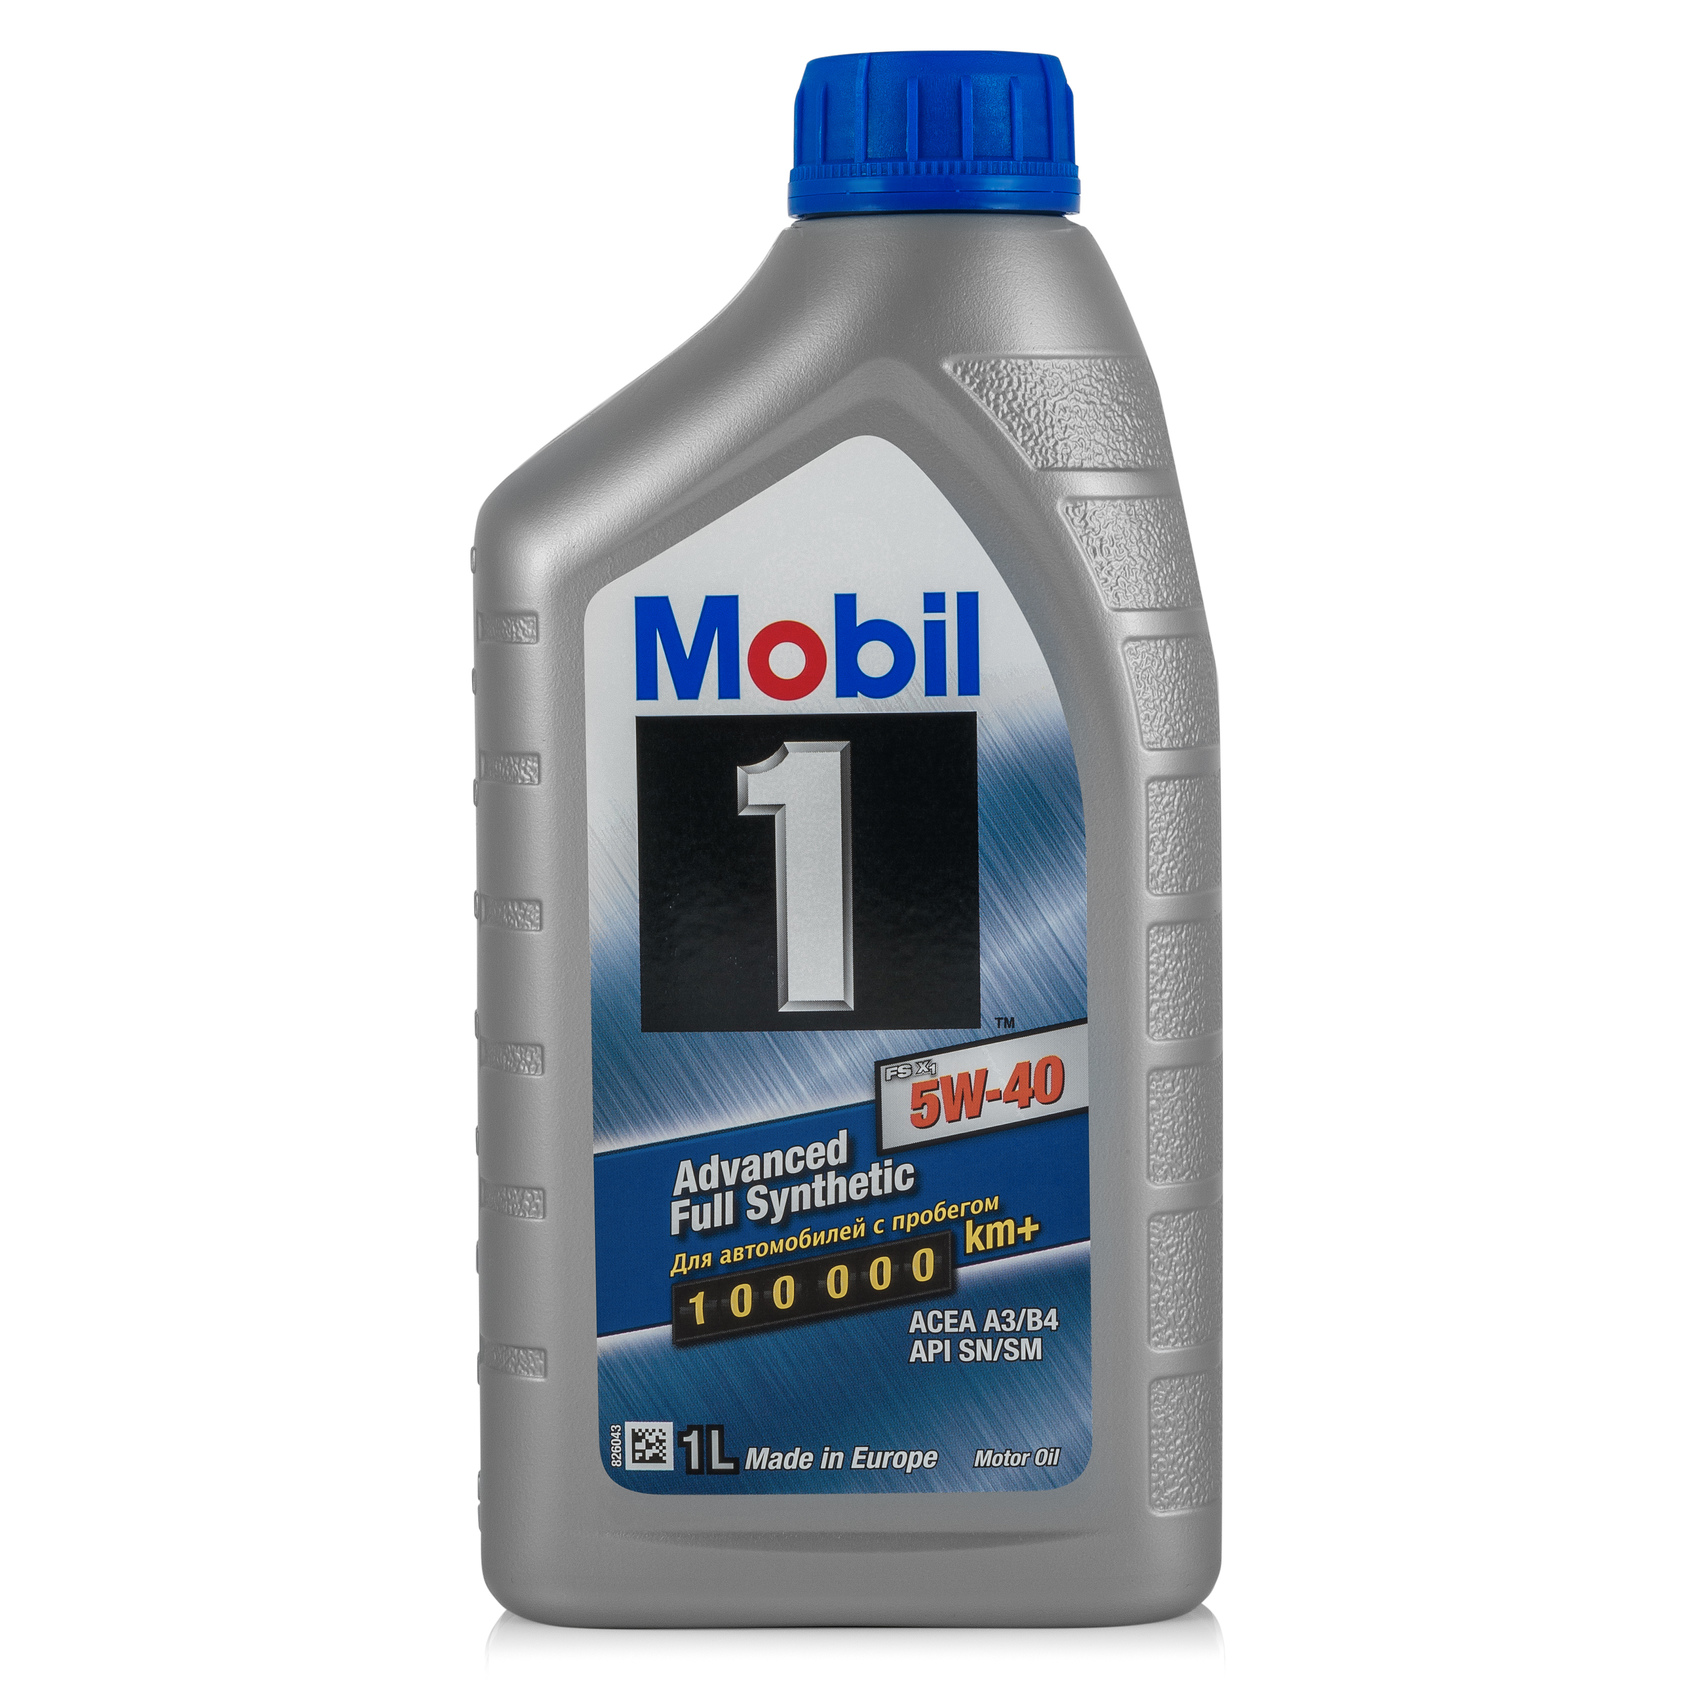 Mobil Engine oil Mobil 1 Full Synthetic 5W-40, 1L – price